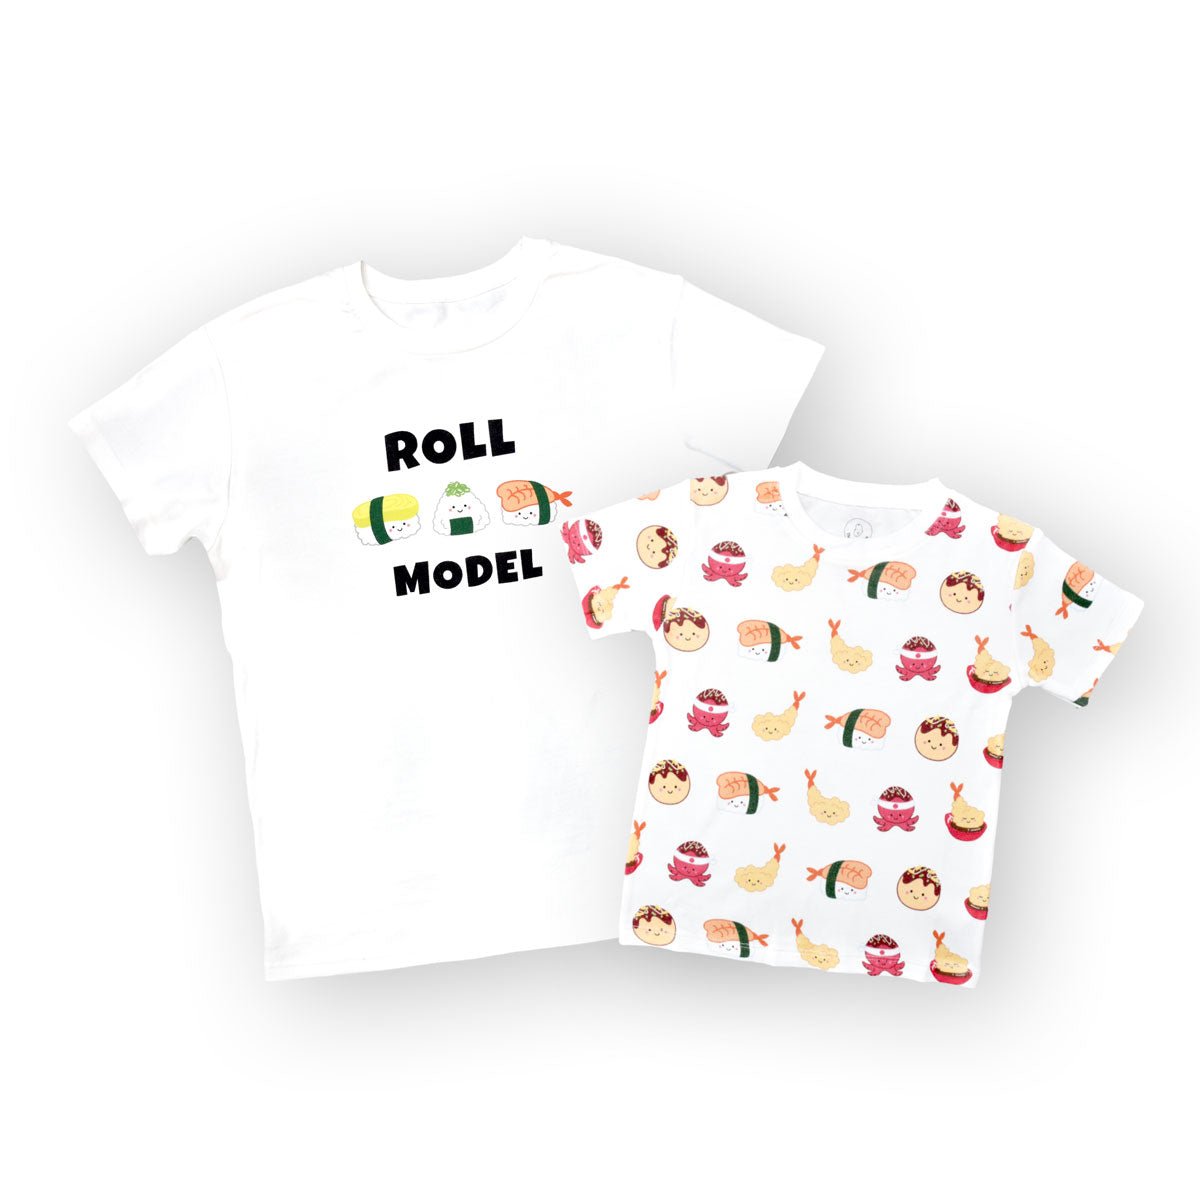 the wee bean organic cotton super soft mommy and me twinning matching t-shirts adult women teen t-shirt in sushi roll model takoyaki